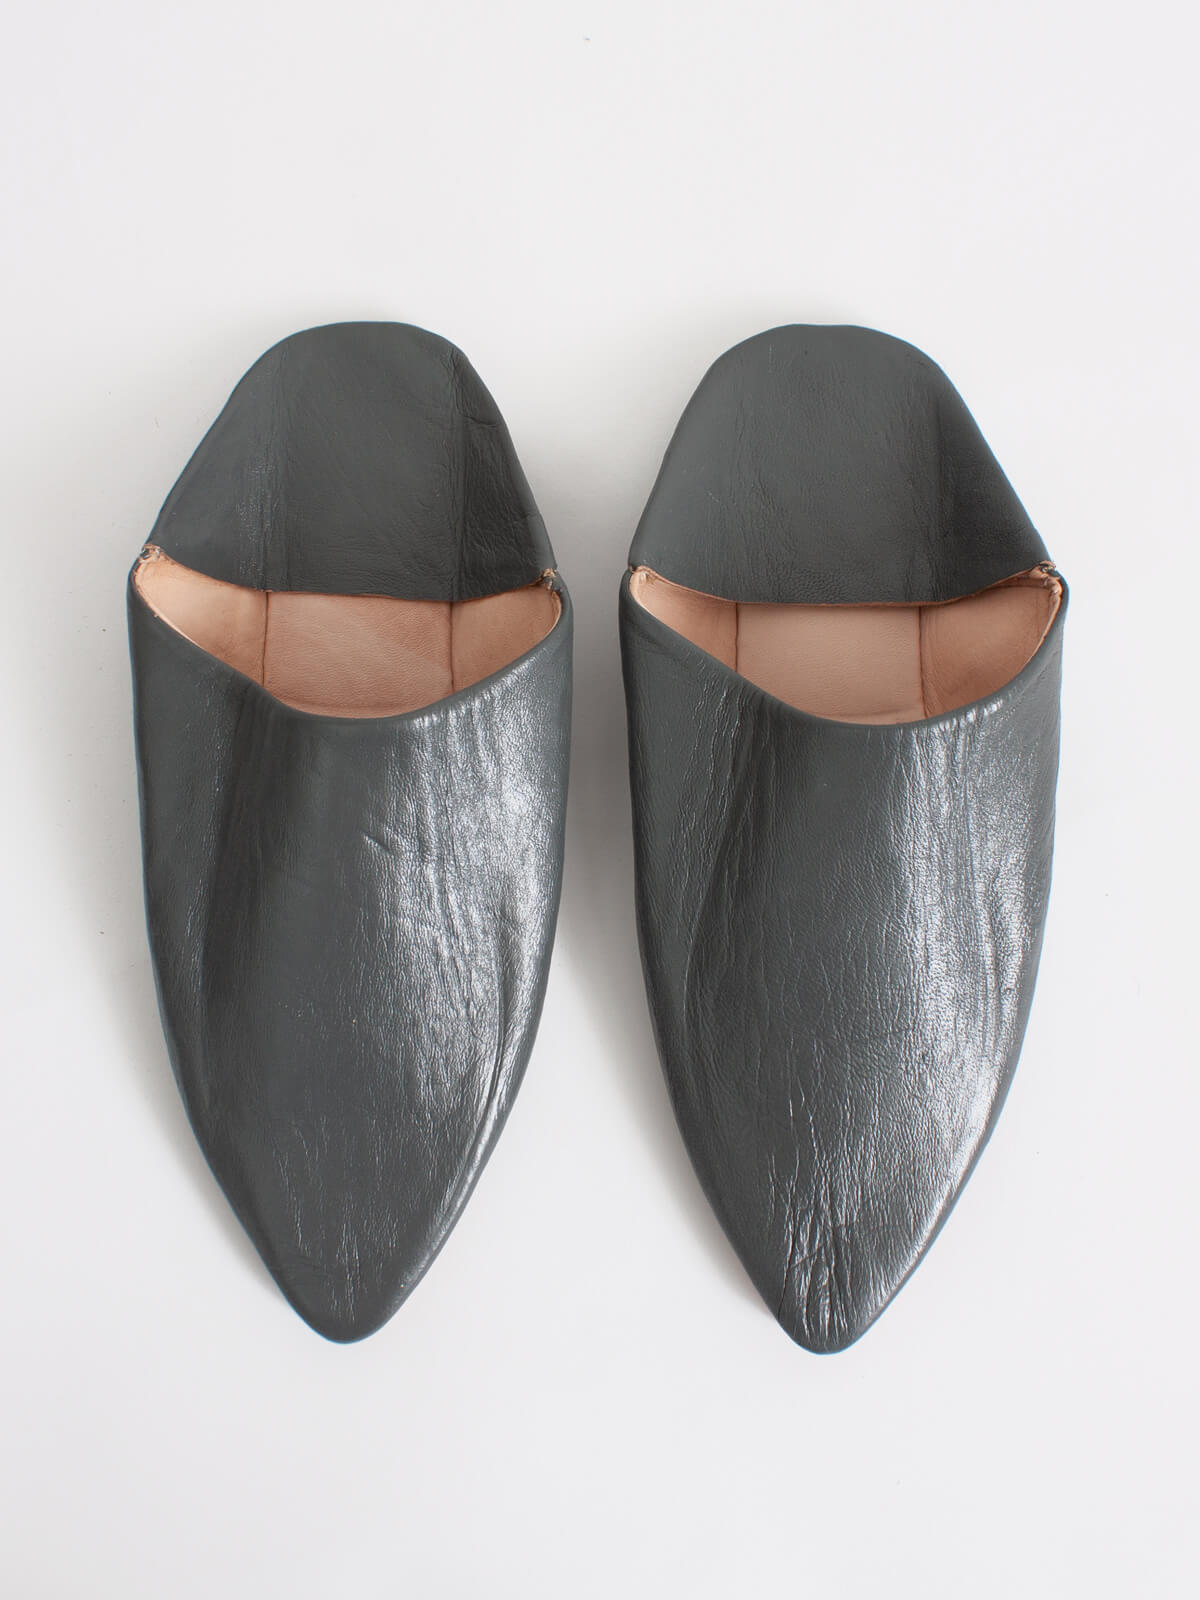 Moroccan Classic Pointed Babouche Slippers, Charcoal